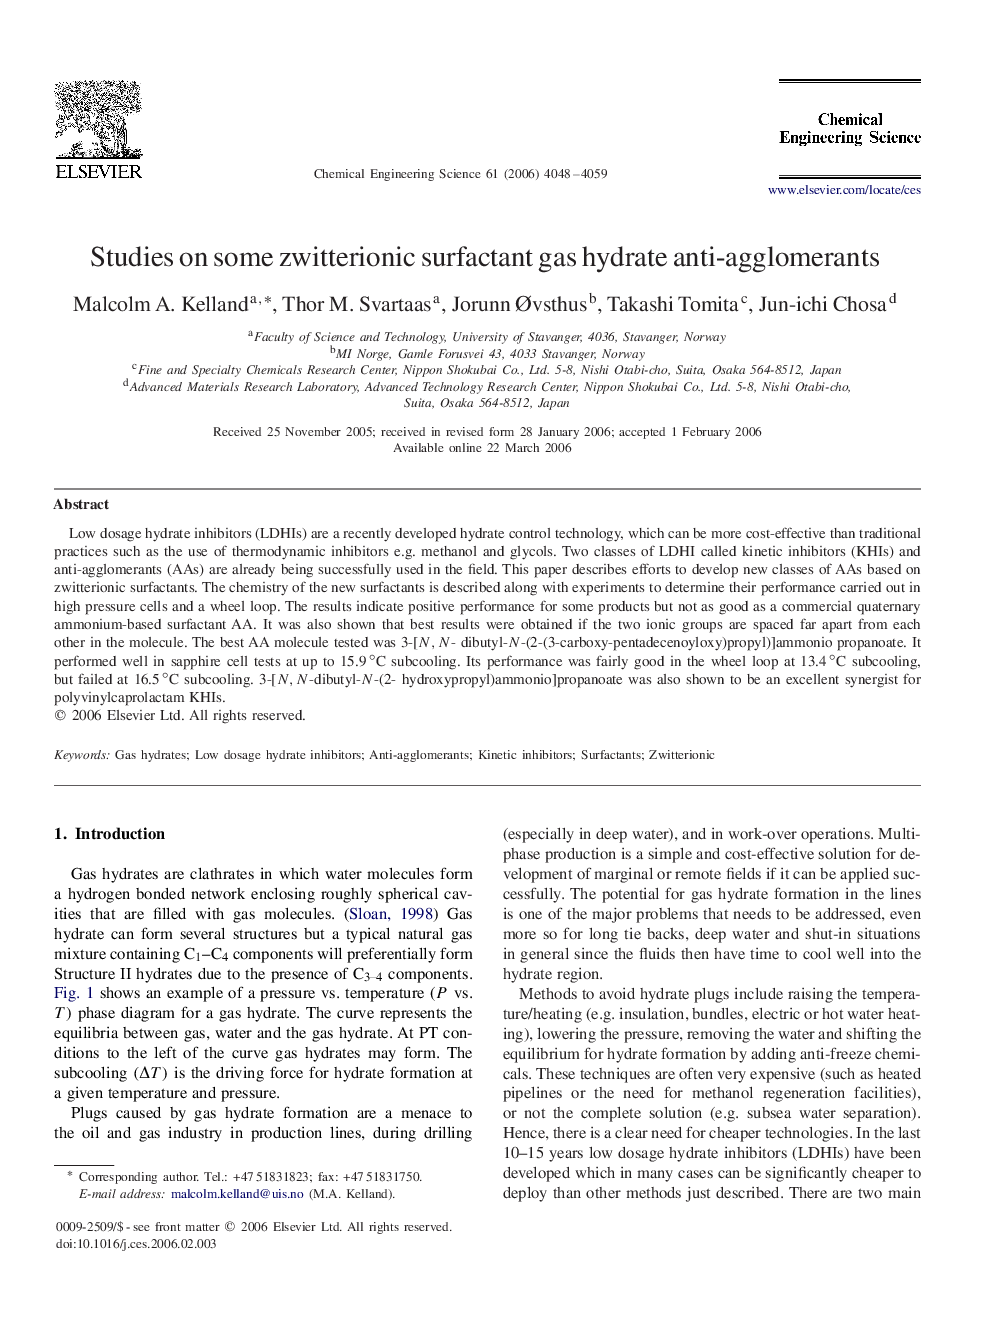 Studies on some zwitterionic surfactant gas hydrate anti-agglomerants